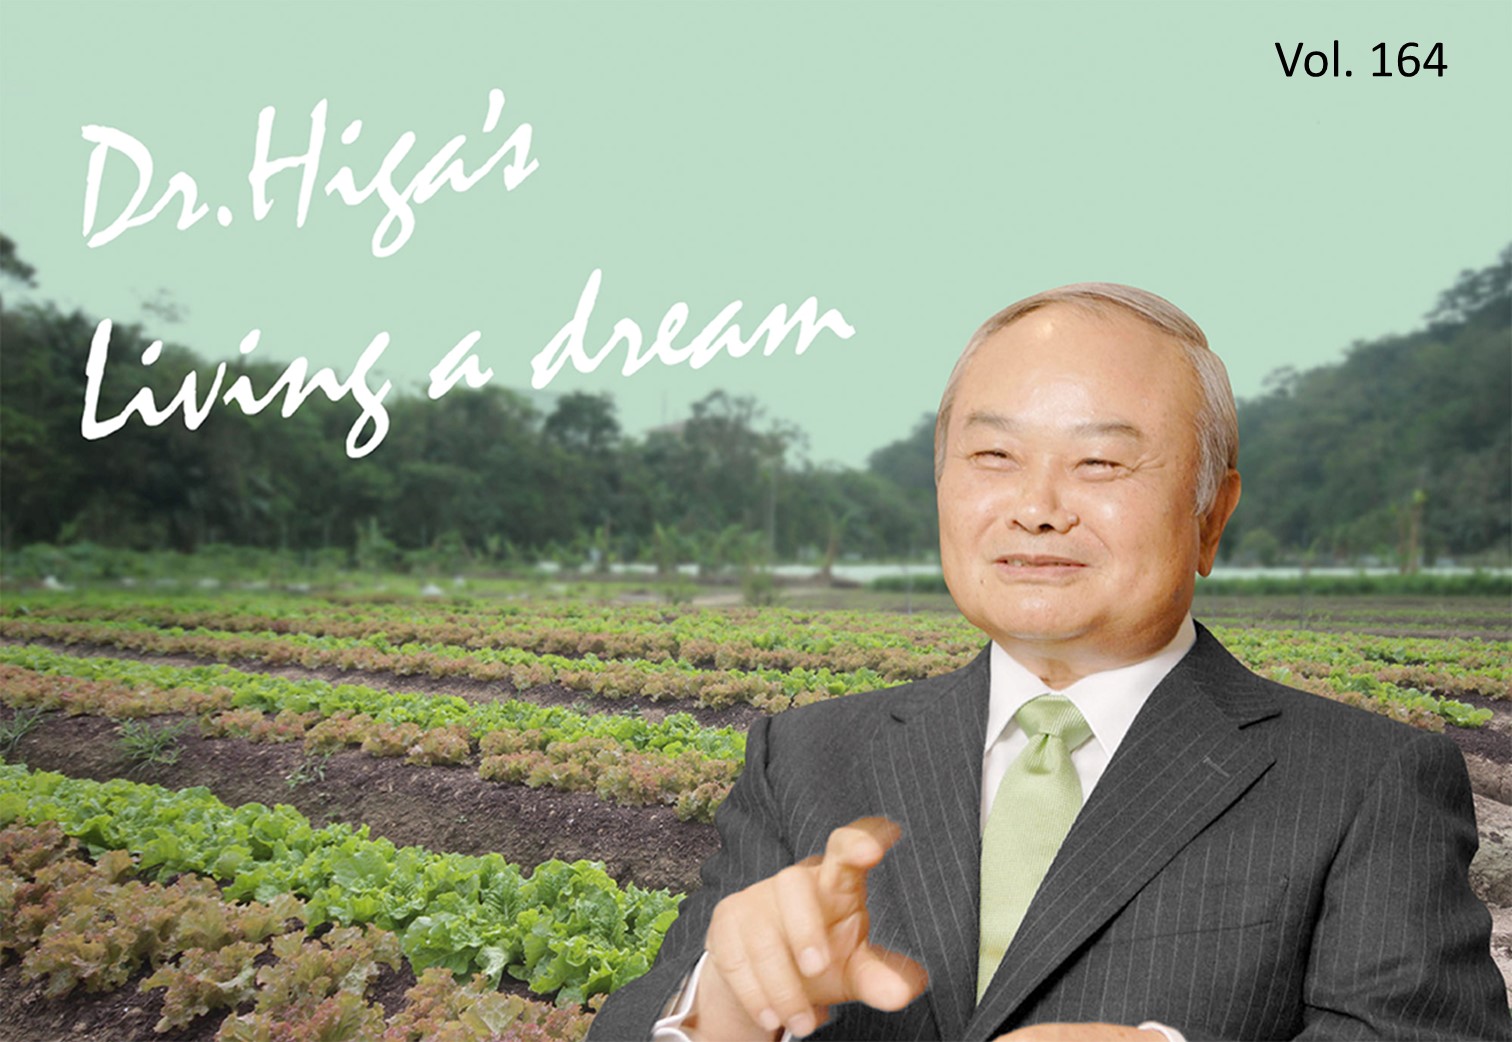 Dr. Higa's "Living a Dream": the latest article #164 is UP!!